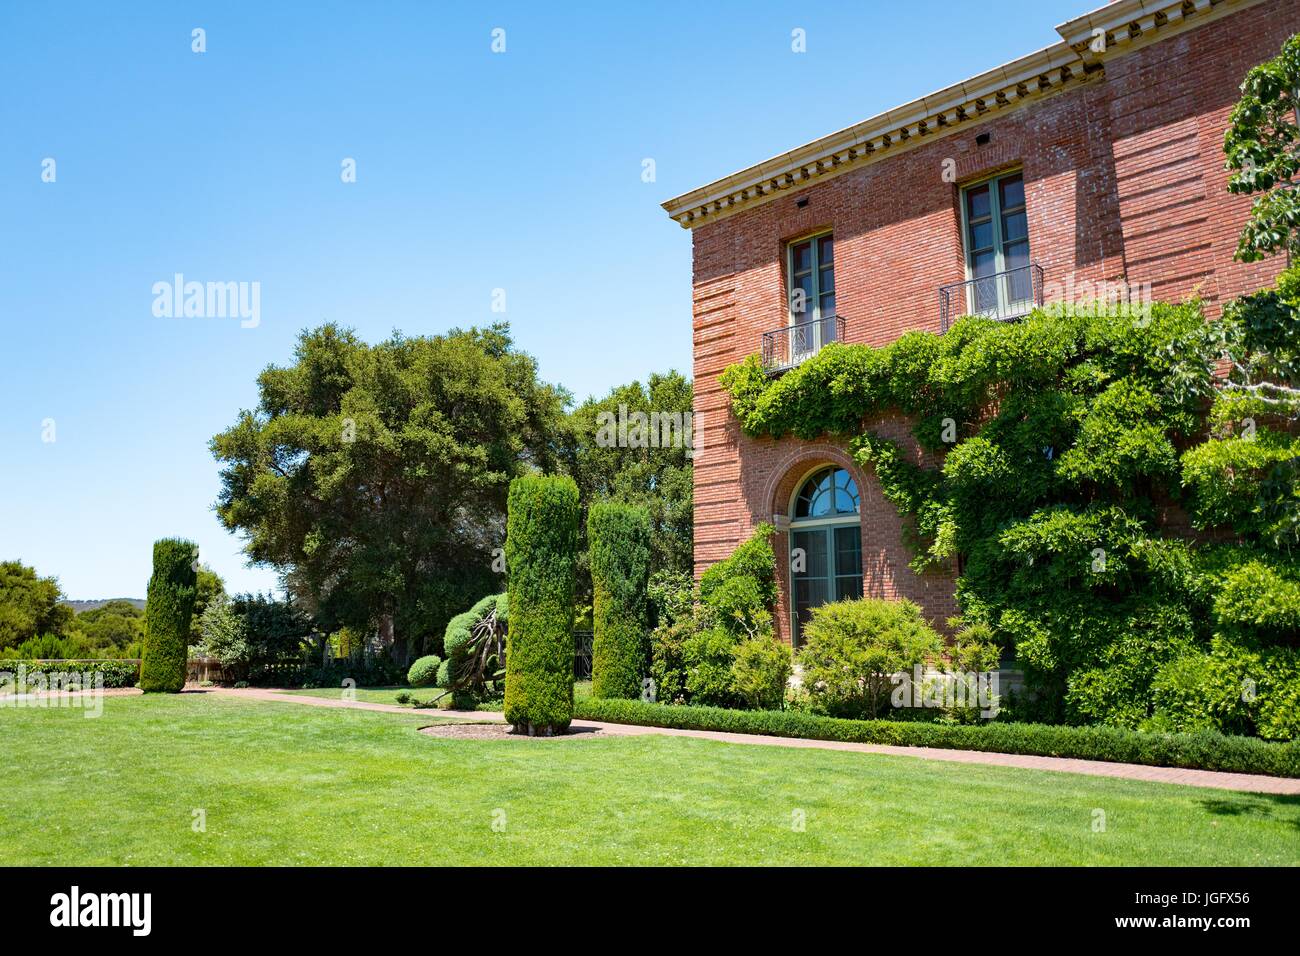 Main house, built in a California Eclectic architectural style, with terrace at Filoli, a preserved country house, formal garden and estate operated by the National Trust for Historic Preservation in Woodside, California, June 23, 2017. Stock Photo